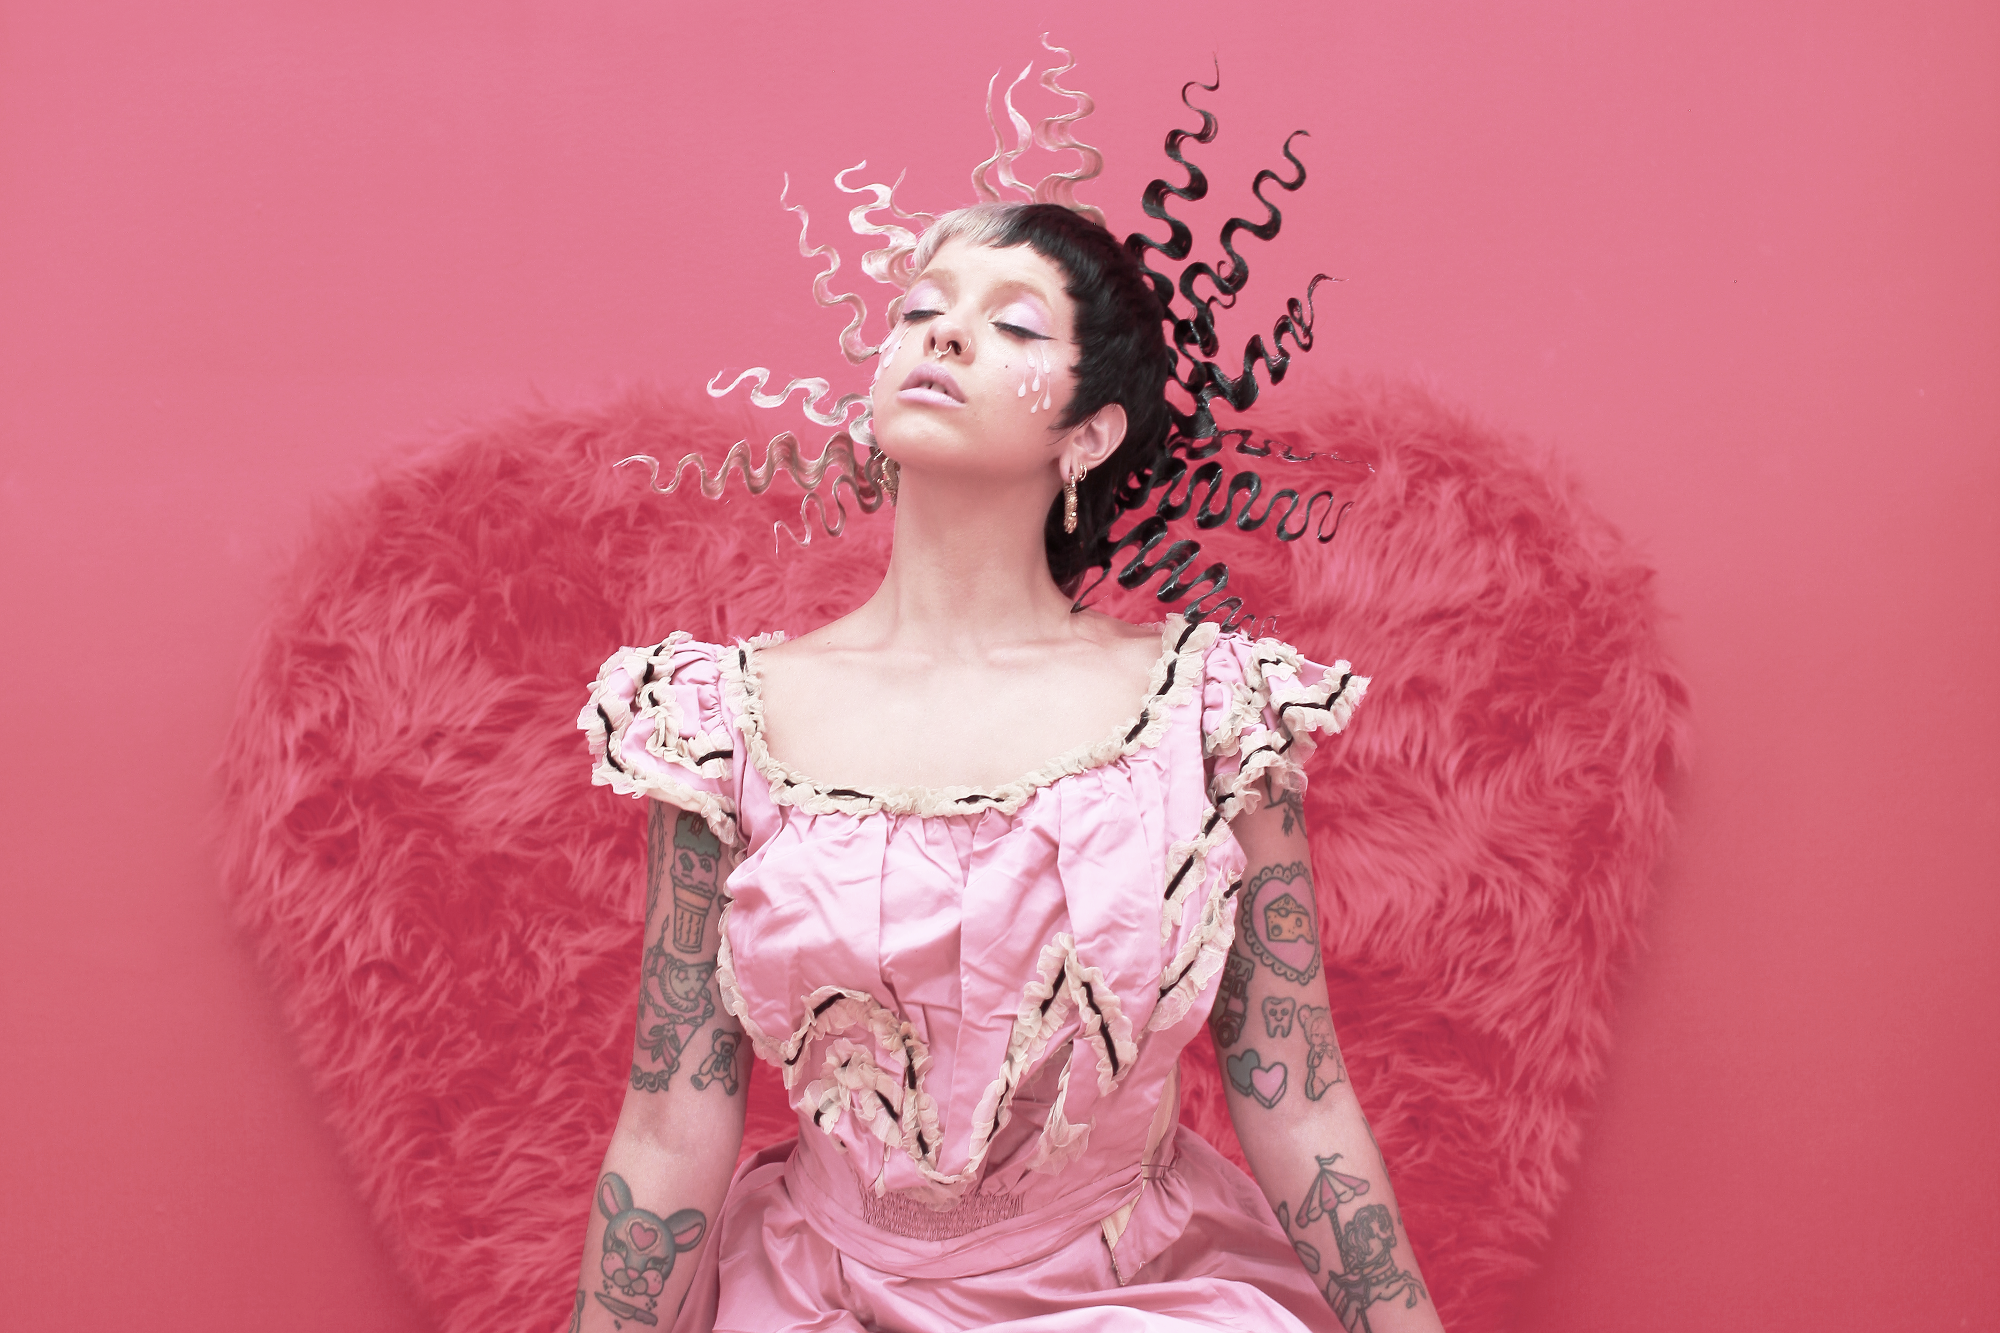 melanie martinez - latest news, breaking stories and comment - The